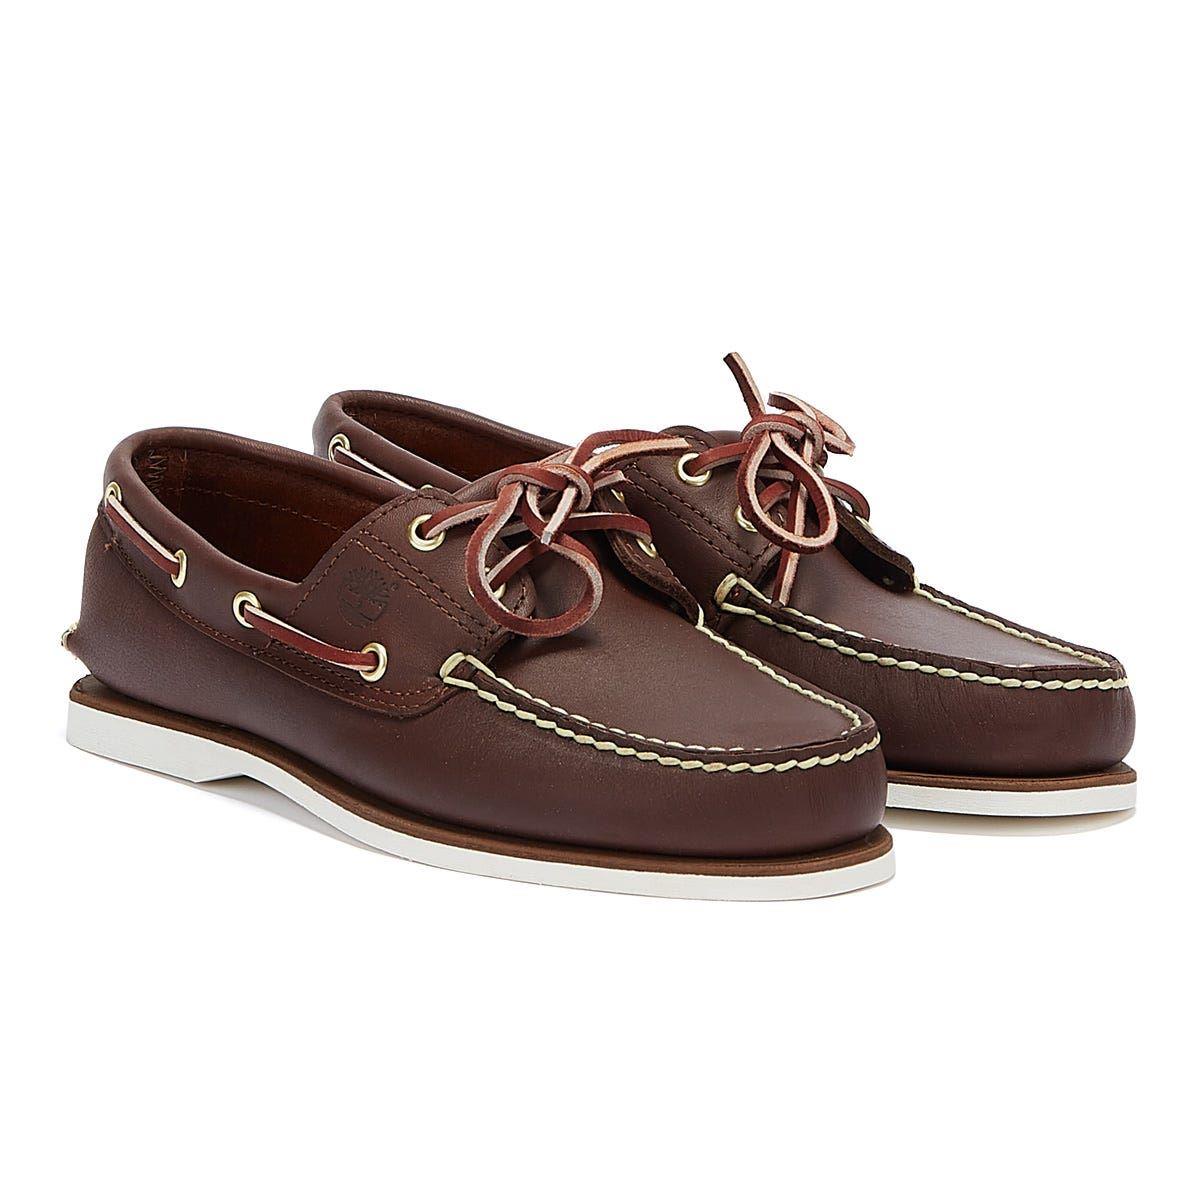 Timberland Boat Men’s Brown Lace-Up Shoes